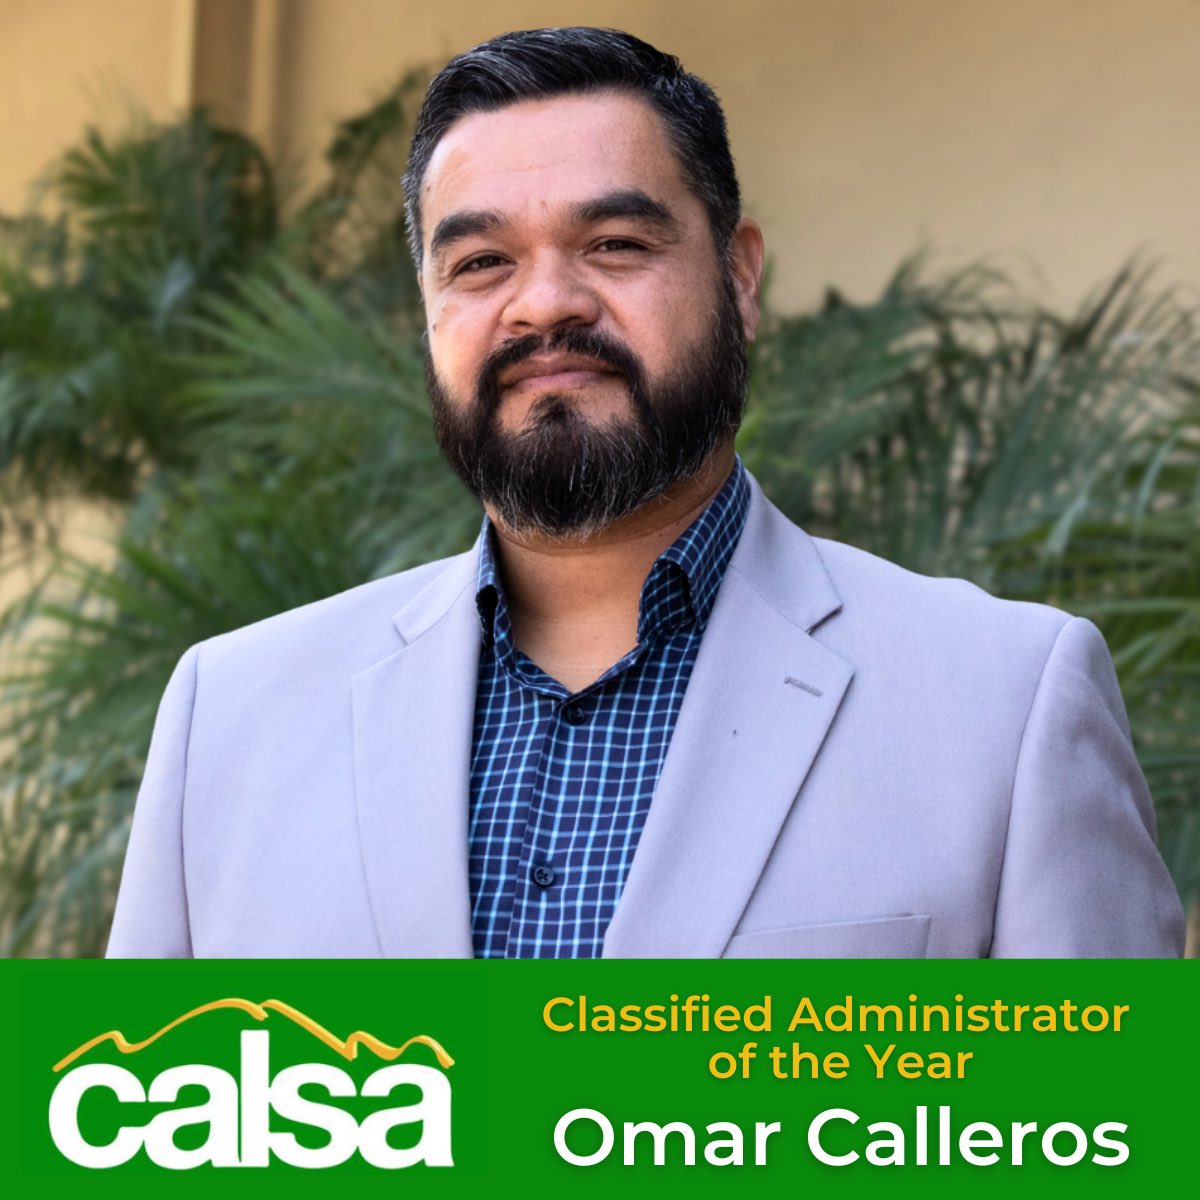 We also congratulate #CVESD Director of Expanded Learning Opportunities Omar Calleros, who was selected as @CALSAfamilia Classified Administrator of the Year. Mr. Calleros has demonstrated visionary leadership through his efforts in developing CVESD LEAD Program.